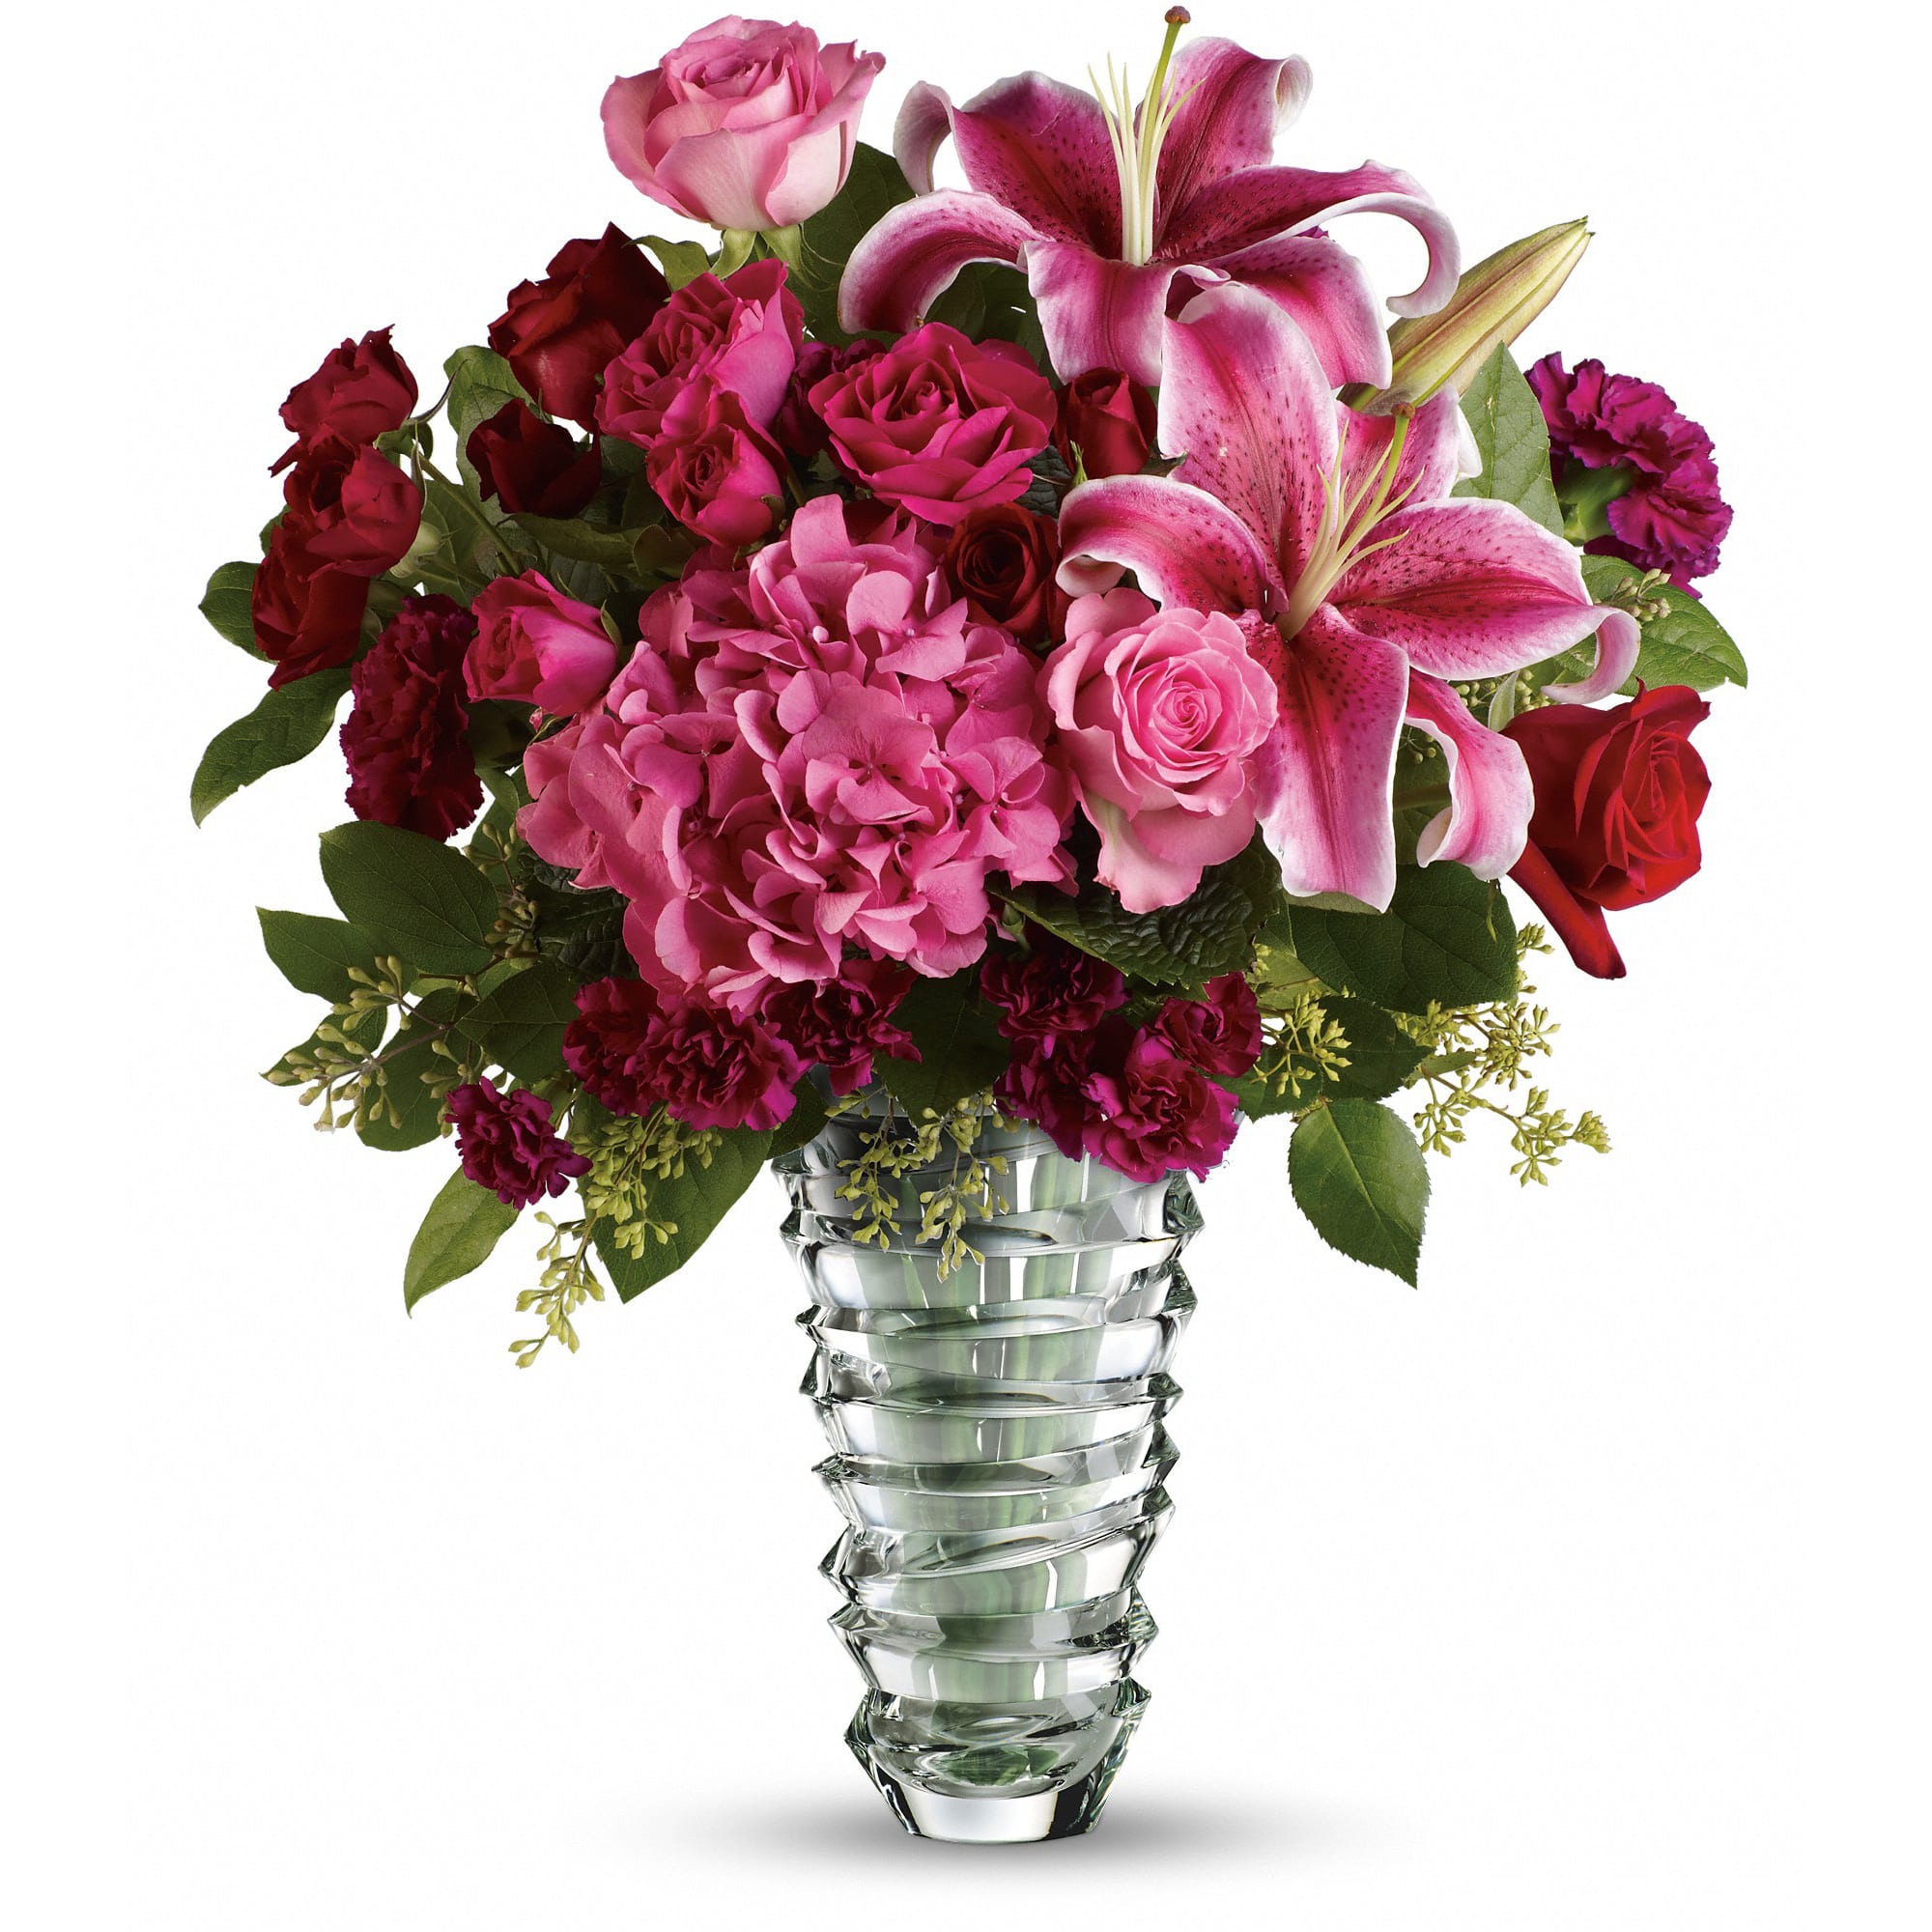 Teleflora's Swept Away - Long Stemmed Roses - Express your passion with the eloquence of Shakespeare thanks to these roses, lilies and other classic flowers of love. Add a contemporary spin with a dazzling glass vase sculpted with free-form rings so vibrant they practically dance. Thy lady will be wowed!  